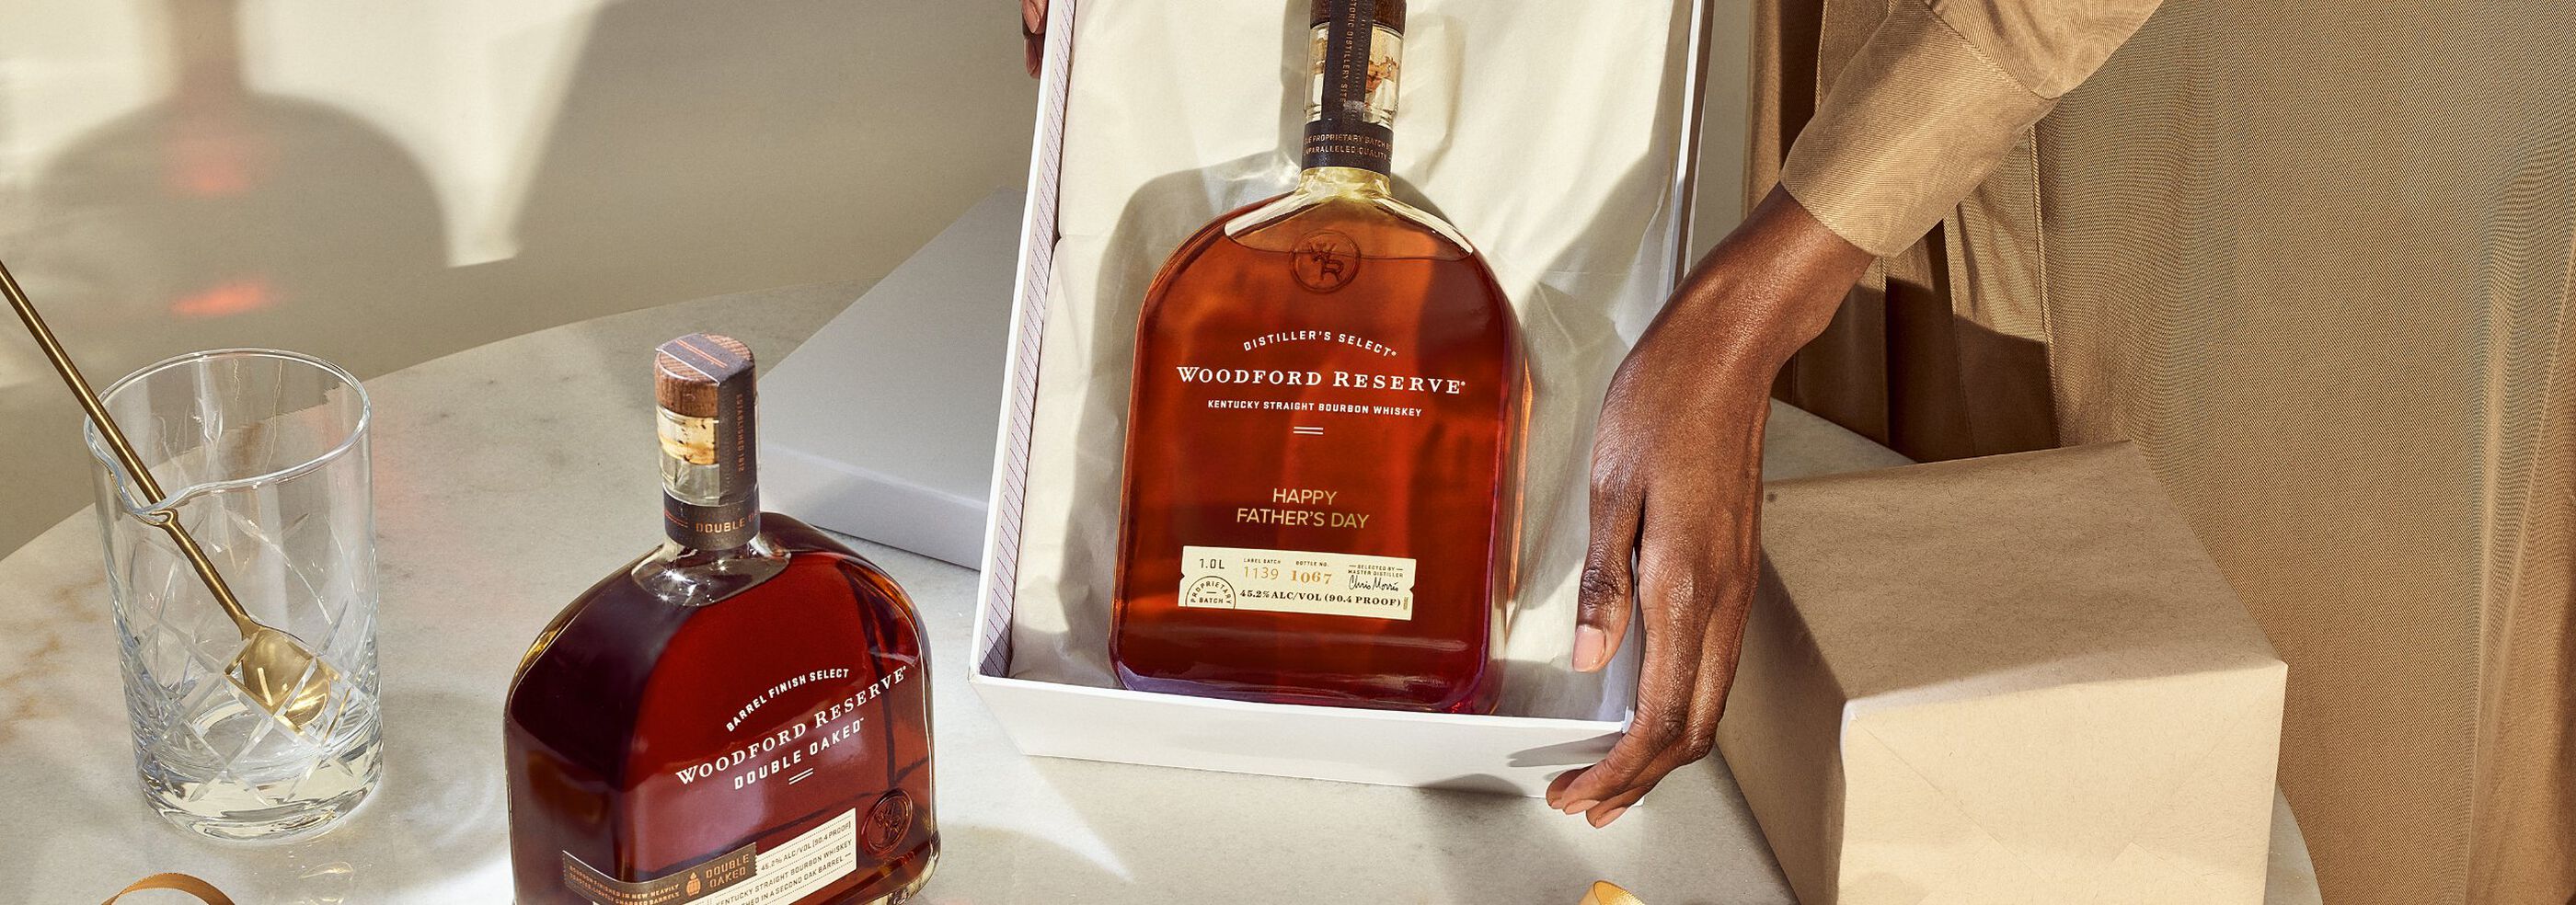 Person holding gift box with Woodford Reserve that is laser-engraved with the message "Happy Father's Day"